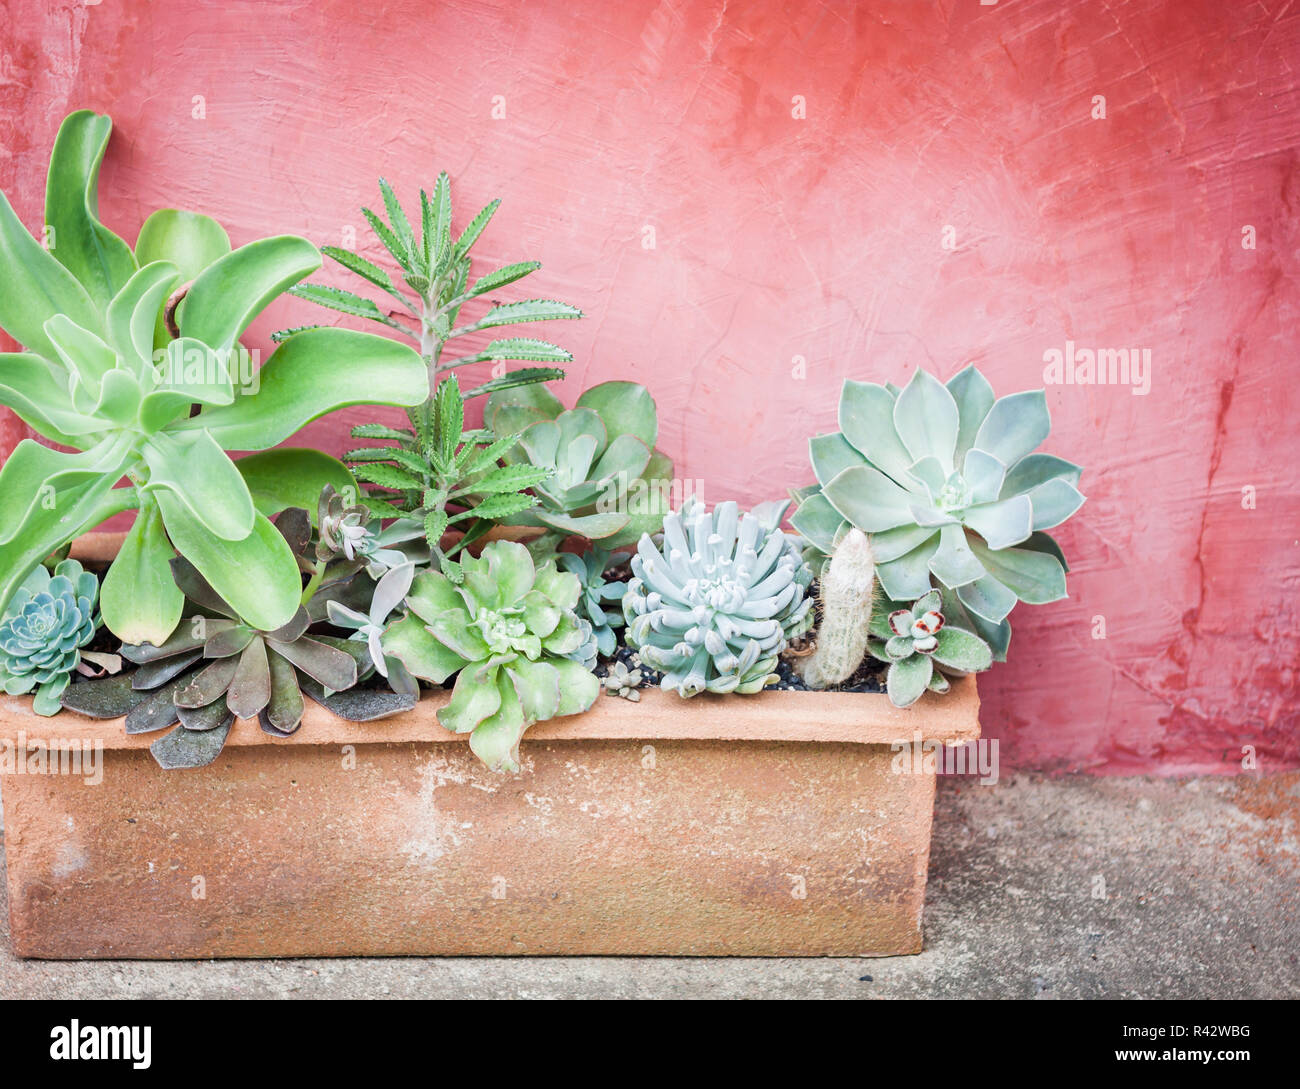 Cactus in pot with red background Stock Photo